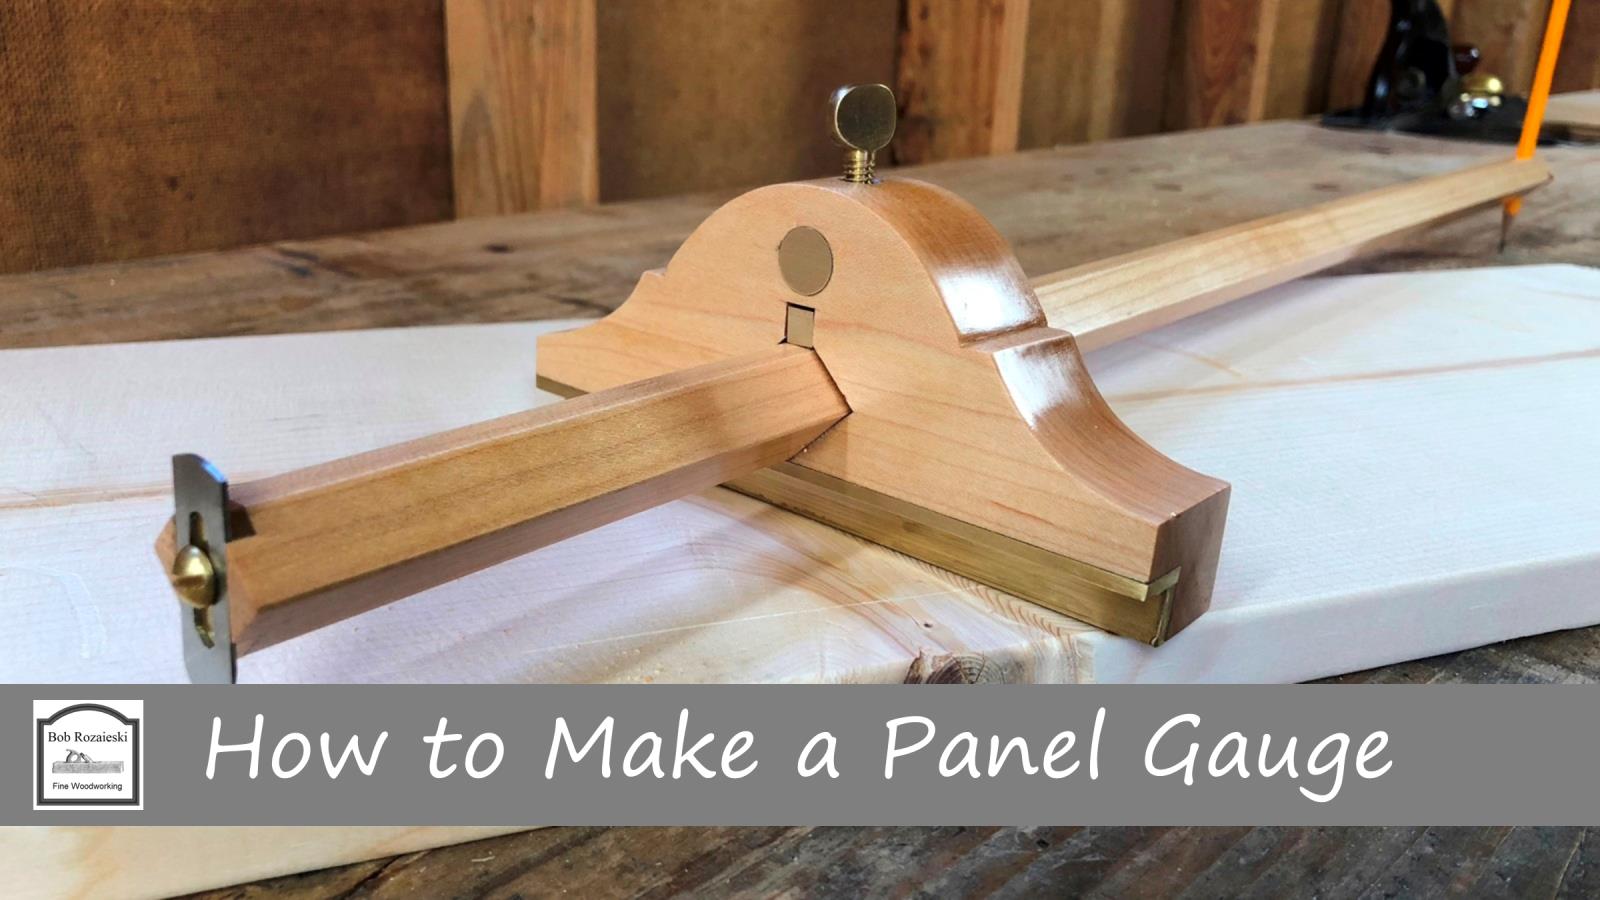 How to Make a Panel Gauge